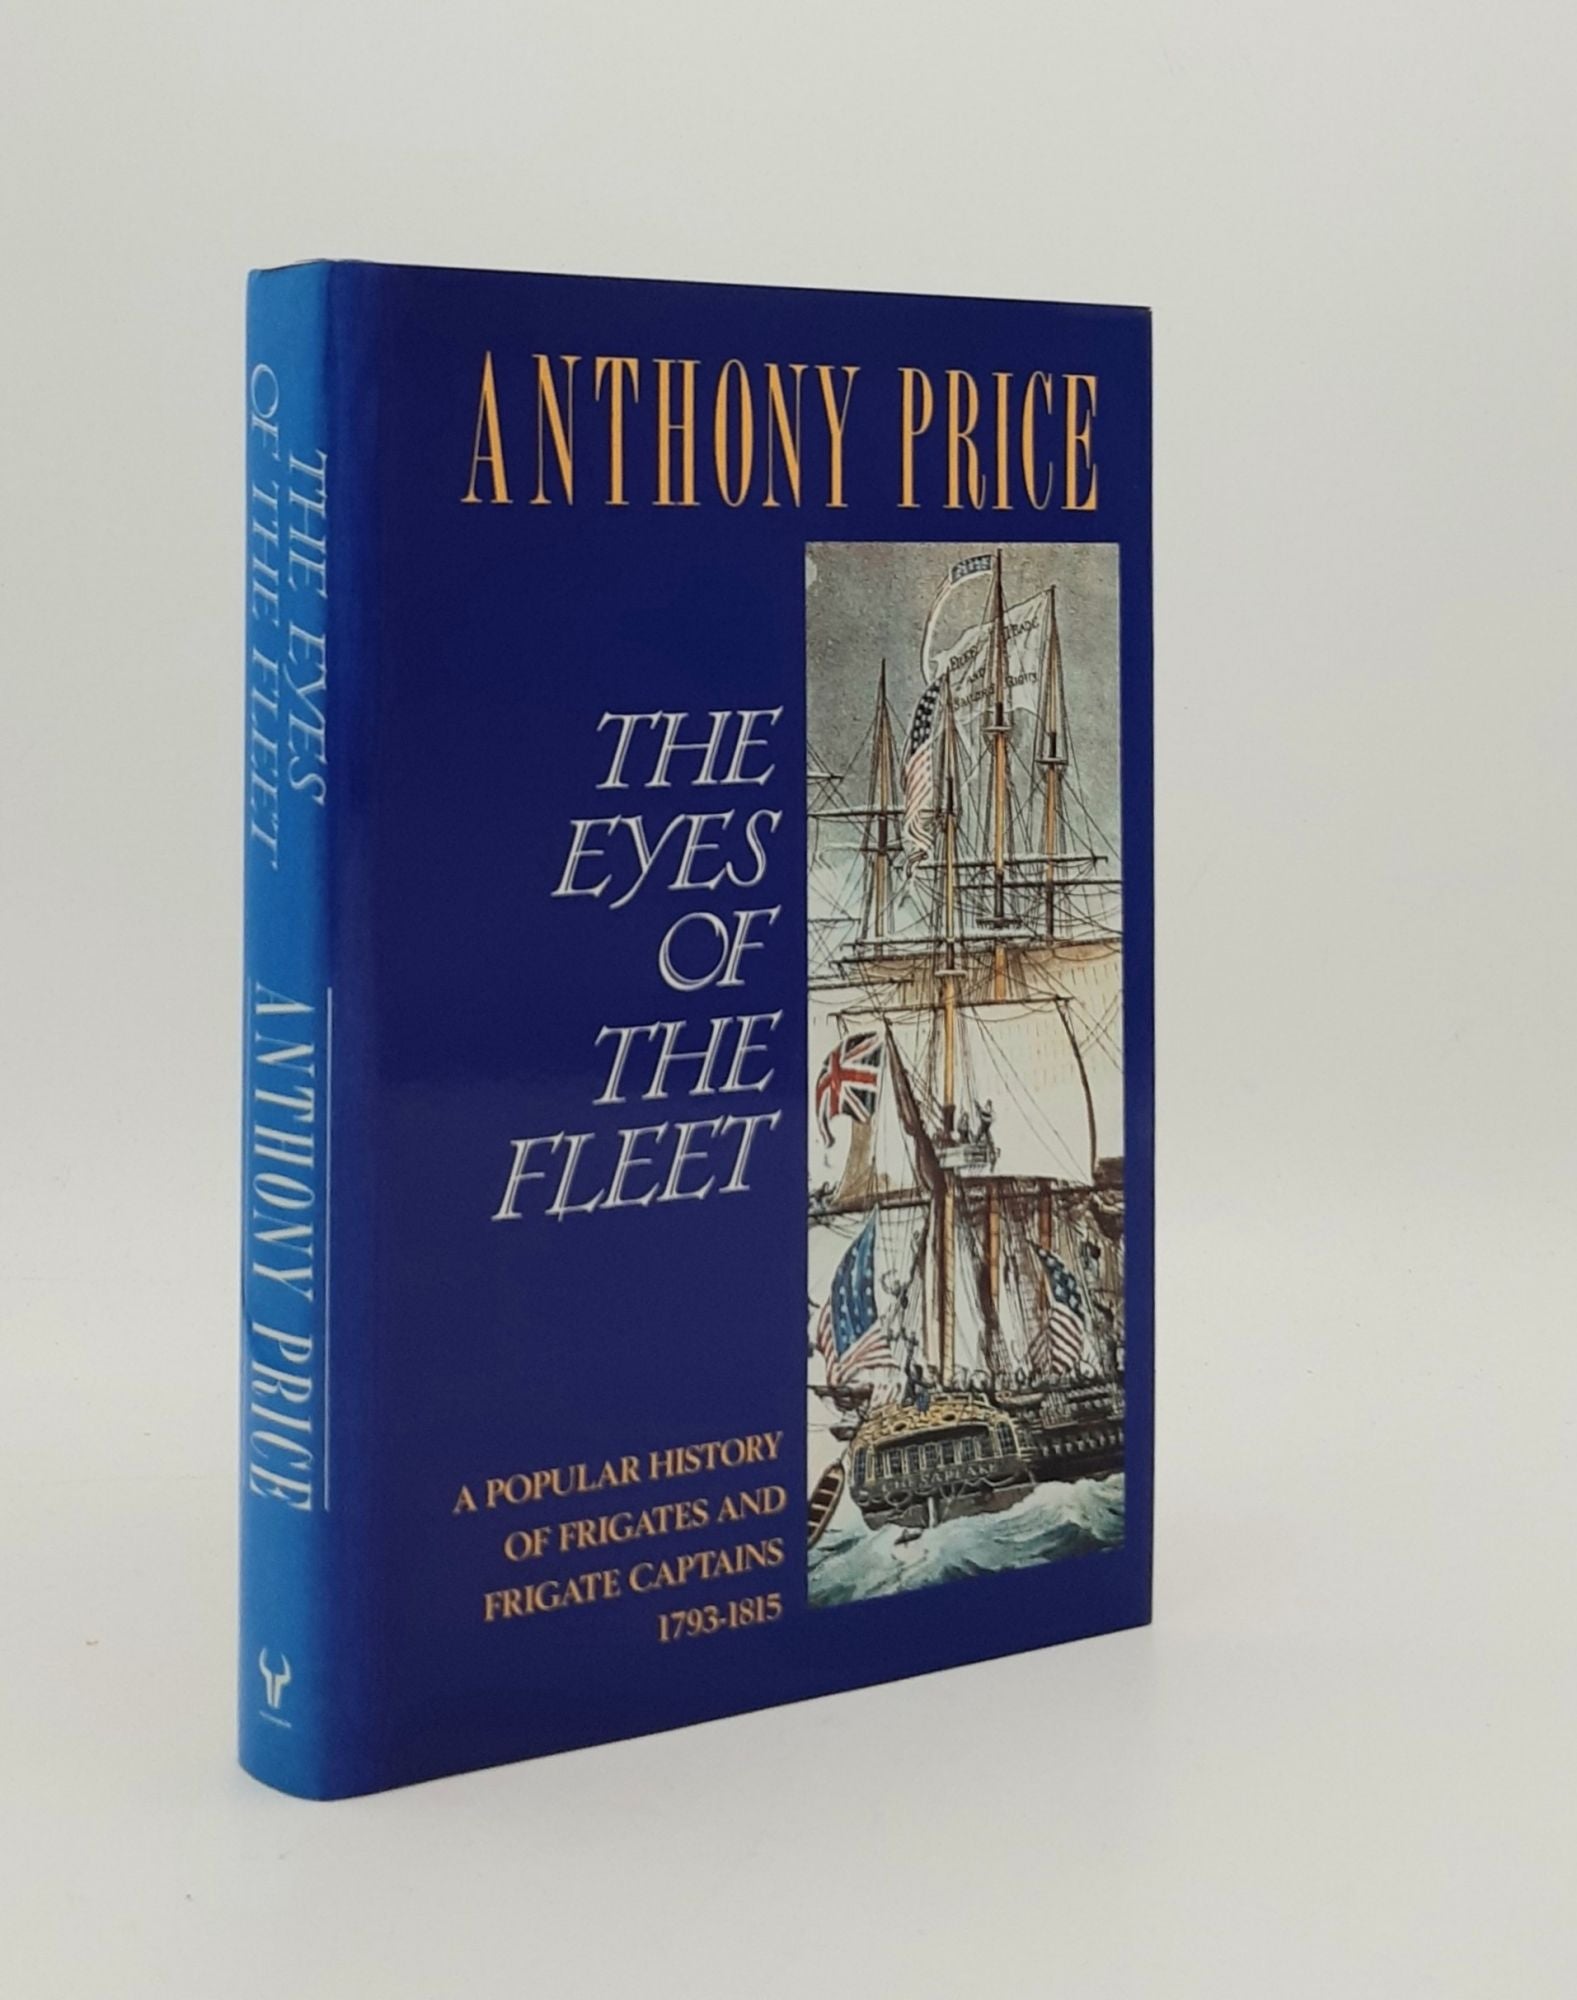 PRICE Anthony - The Eyes of the Fleet a Popular History of Frigates and Frigate Captains 1793-1815